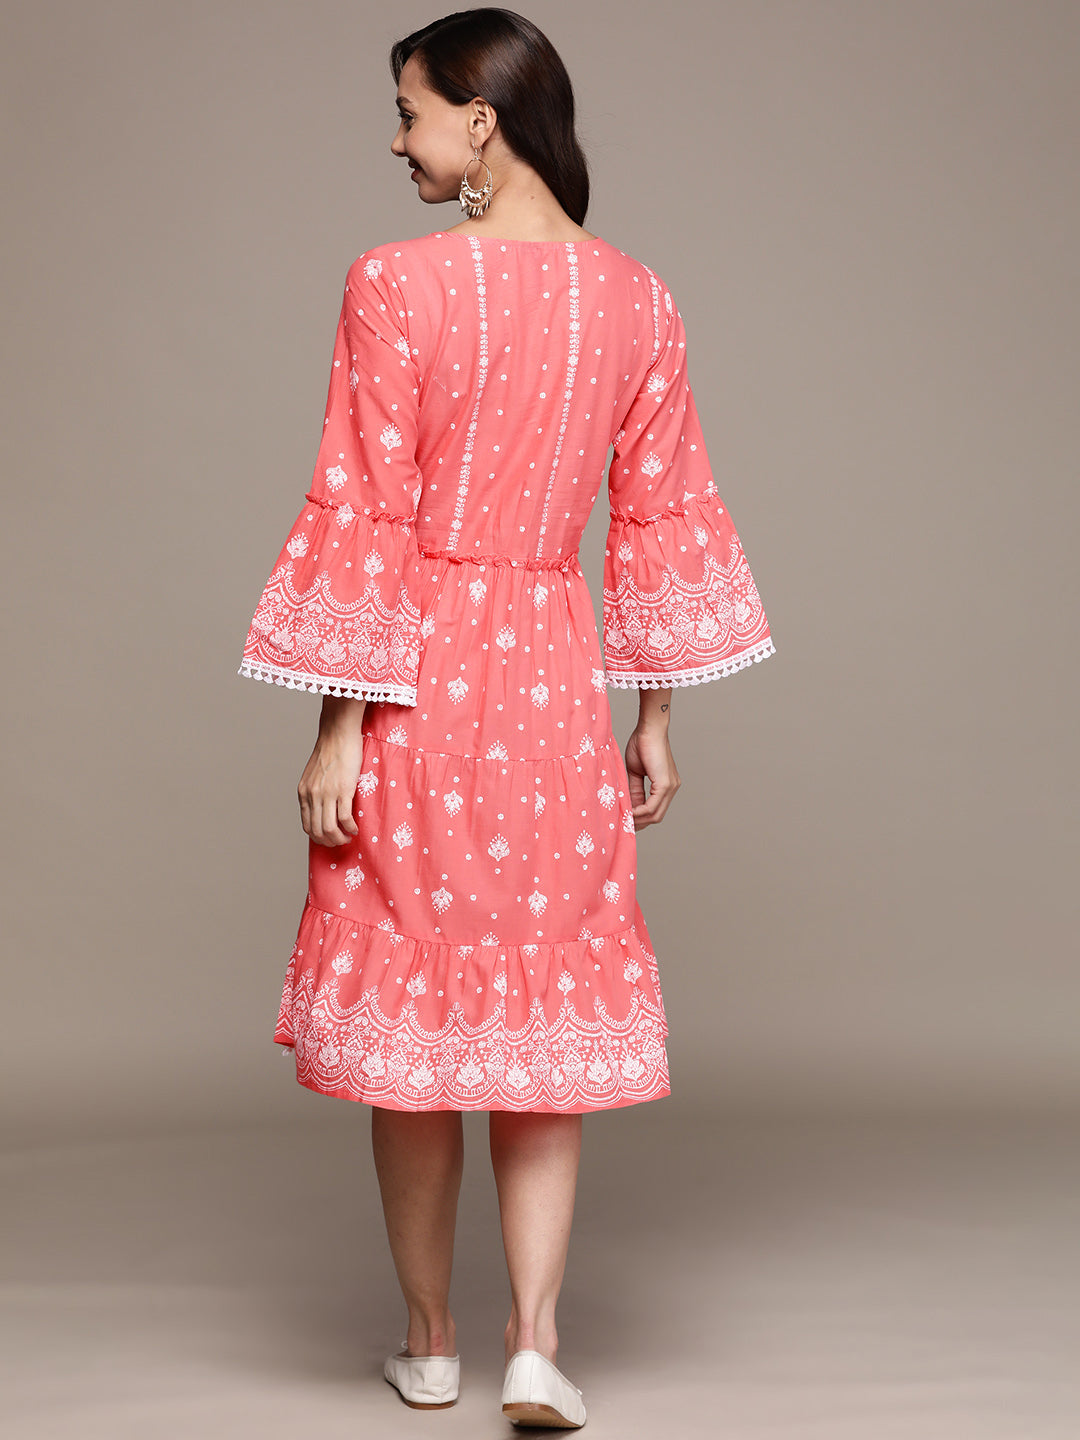 Ishin Women's Cotton Pink Embroidered A-Line Dress